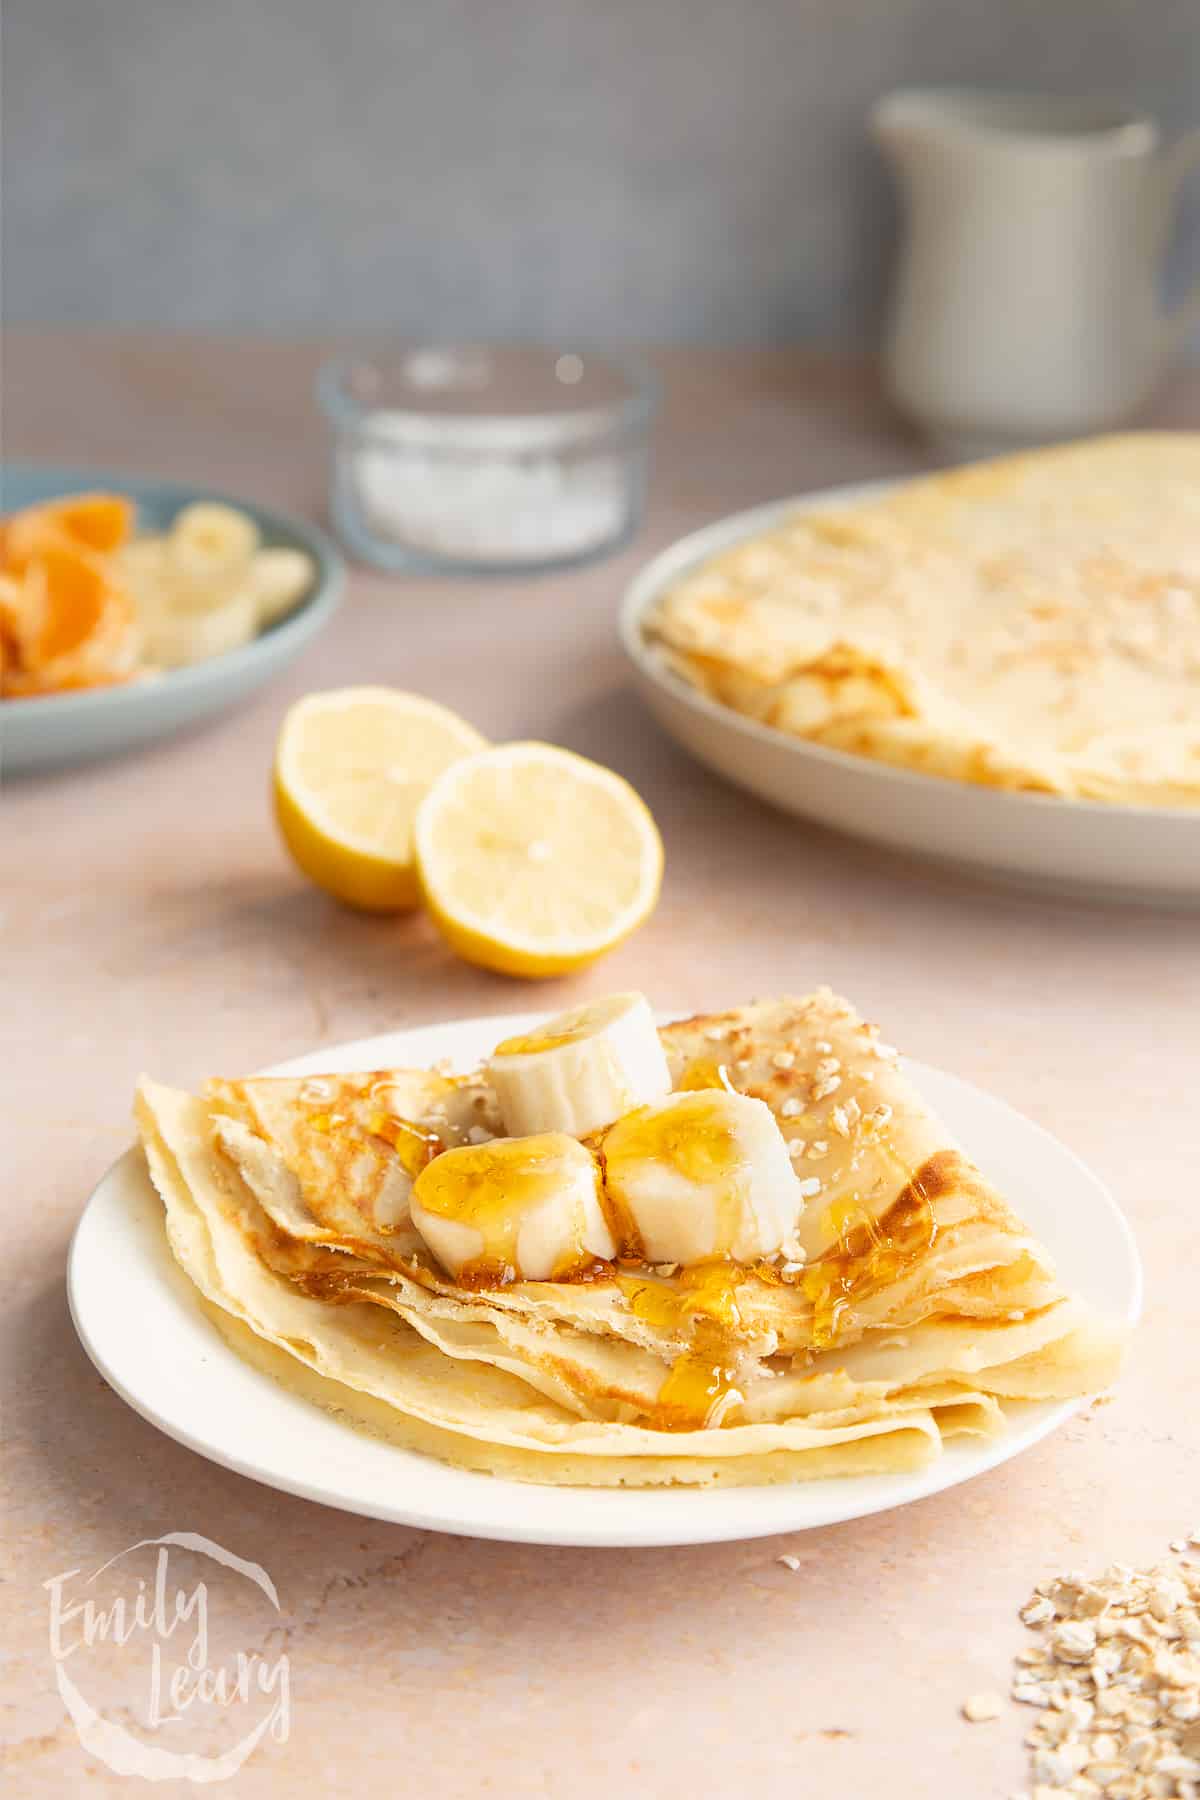 Gluten free crepe on a white plate. It is folded and topped with bananas and golden syrup.